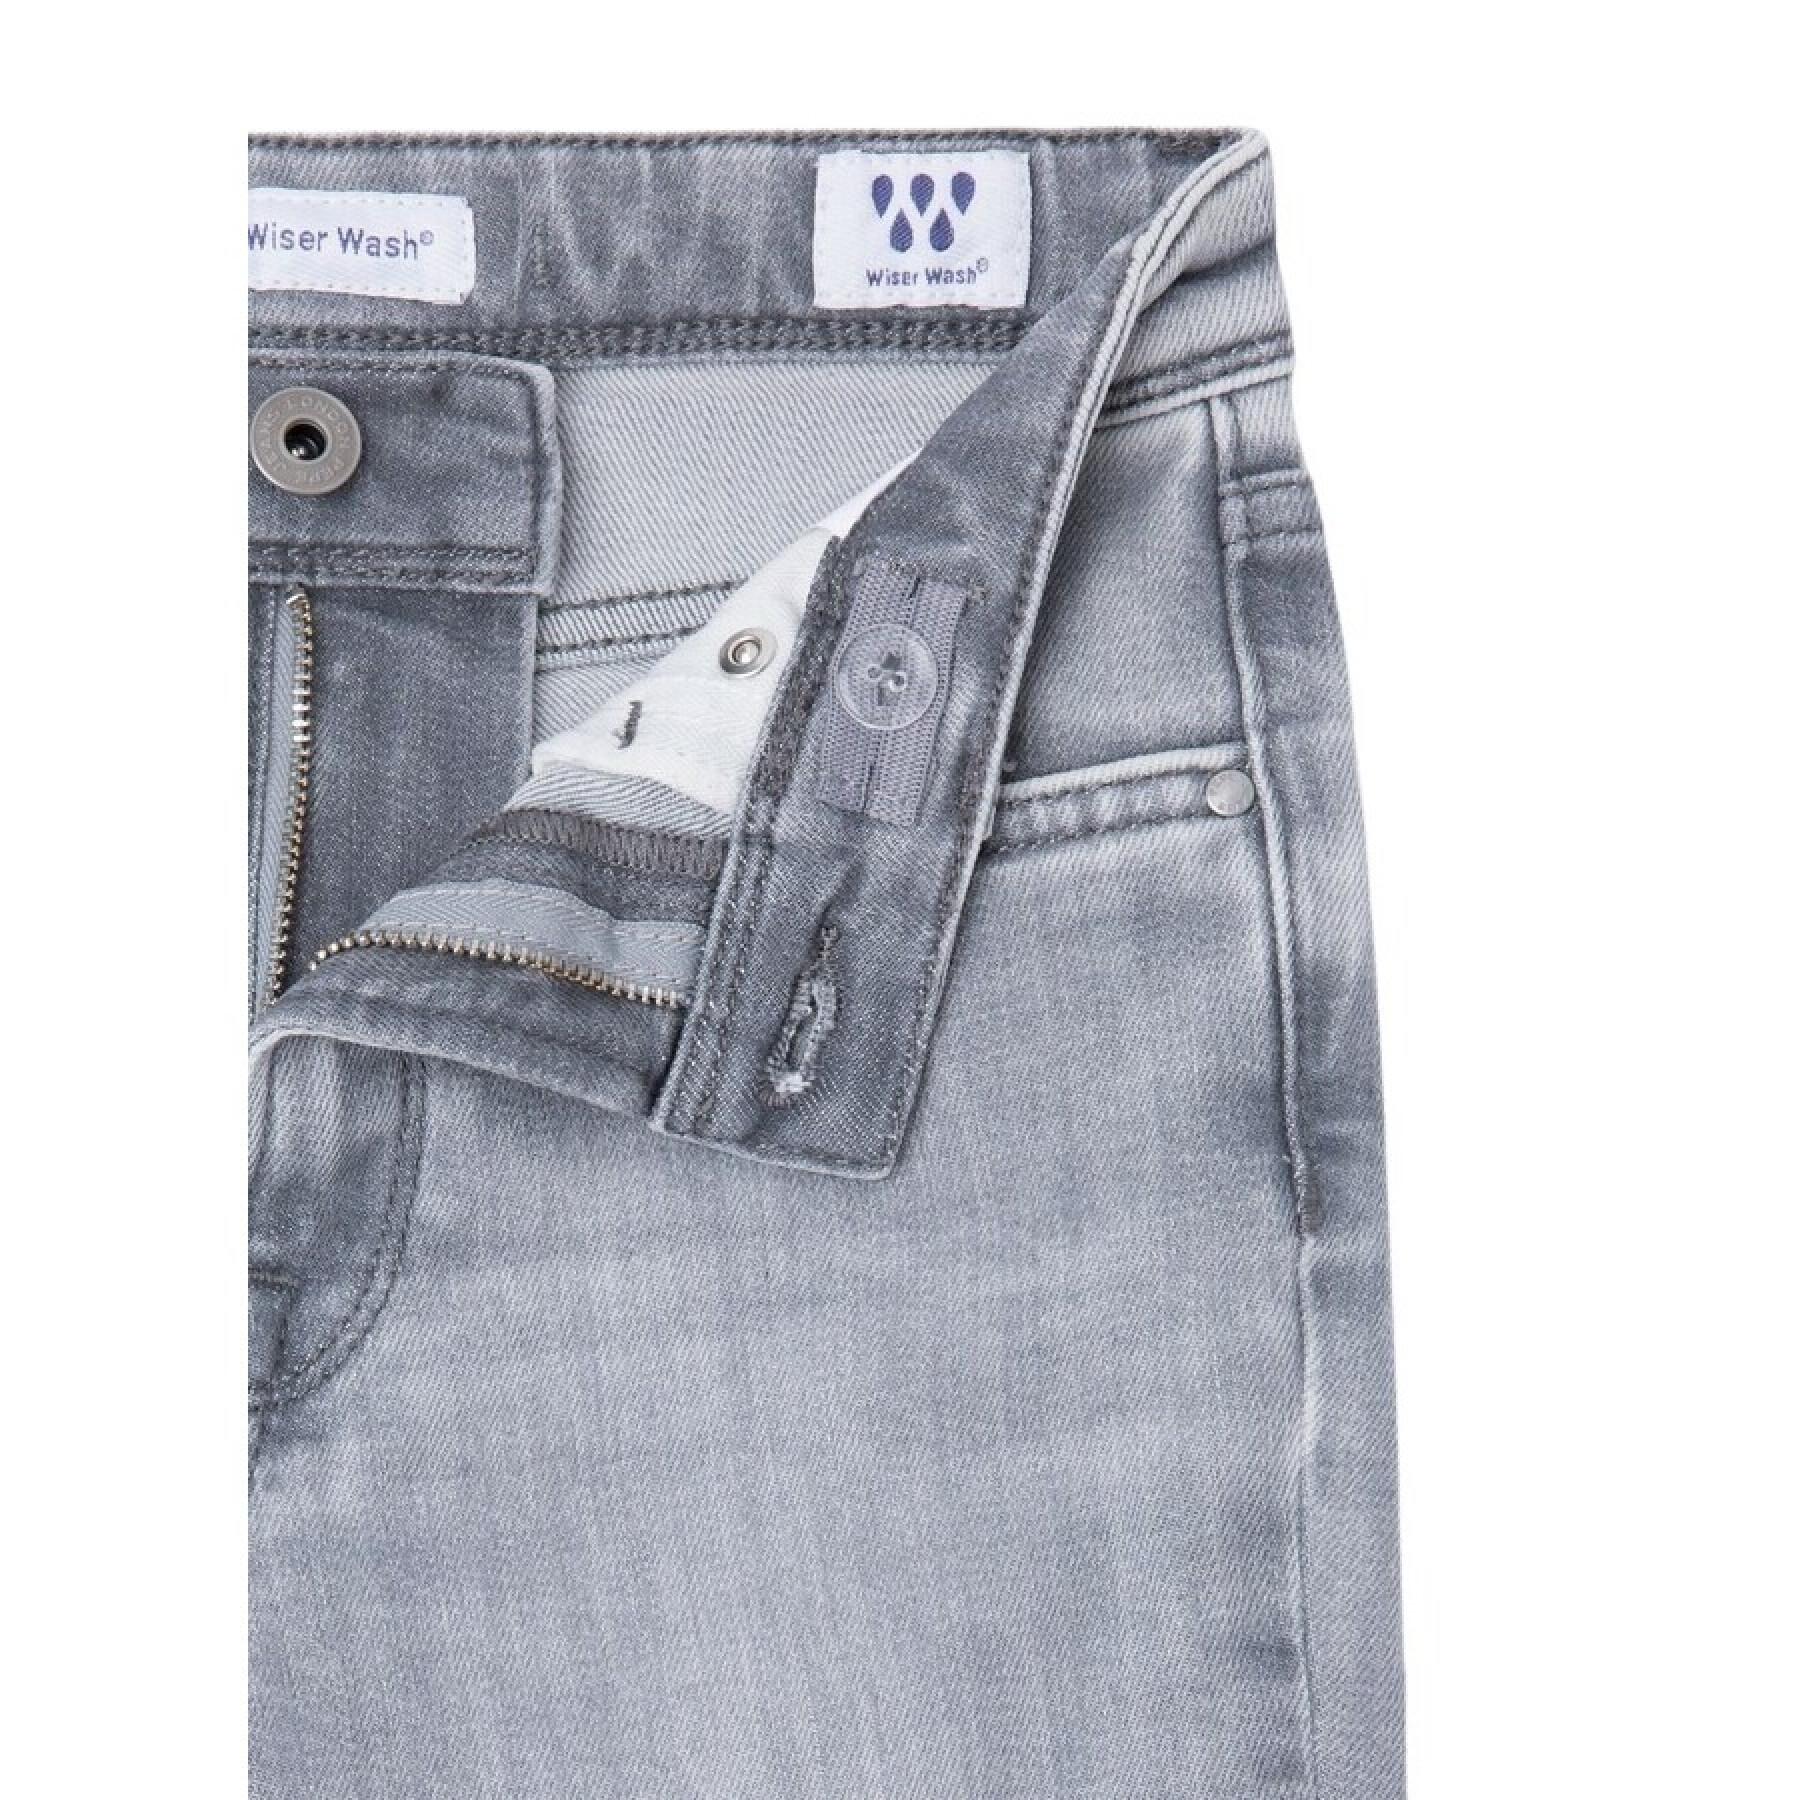 Girl's high jeans Pepe Jeans Pixlette